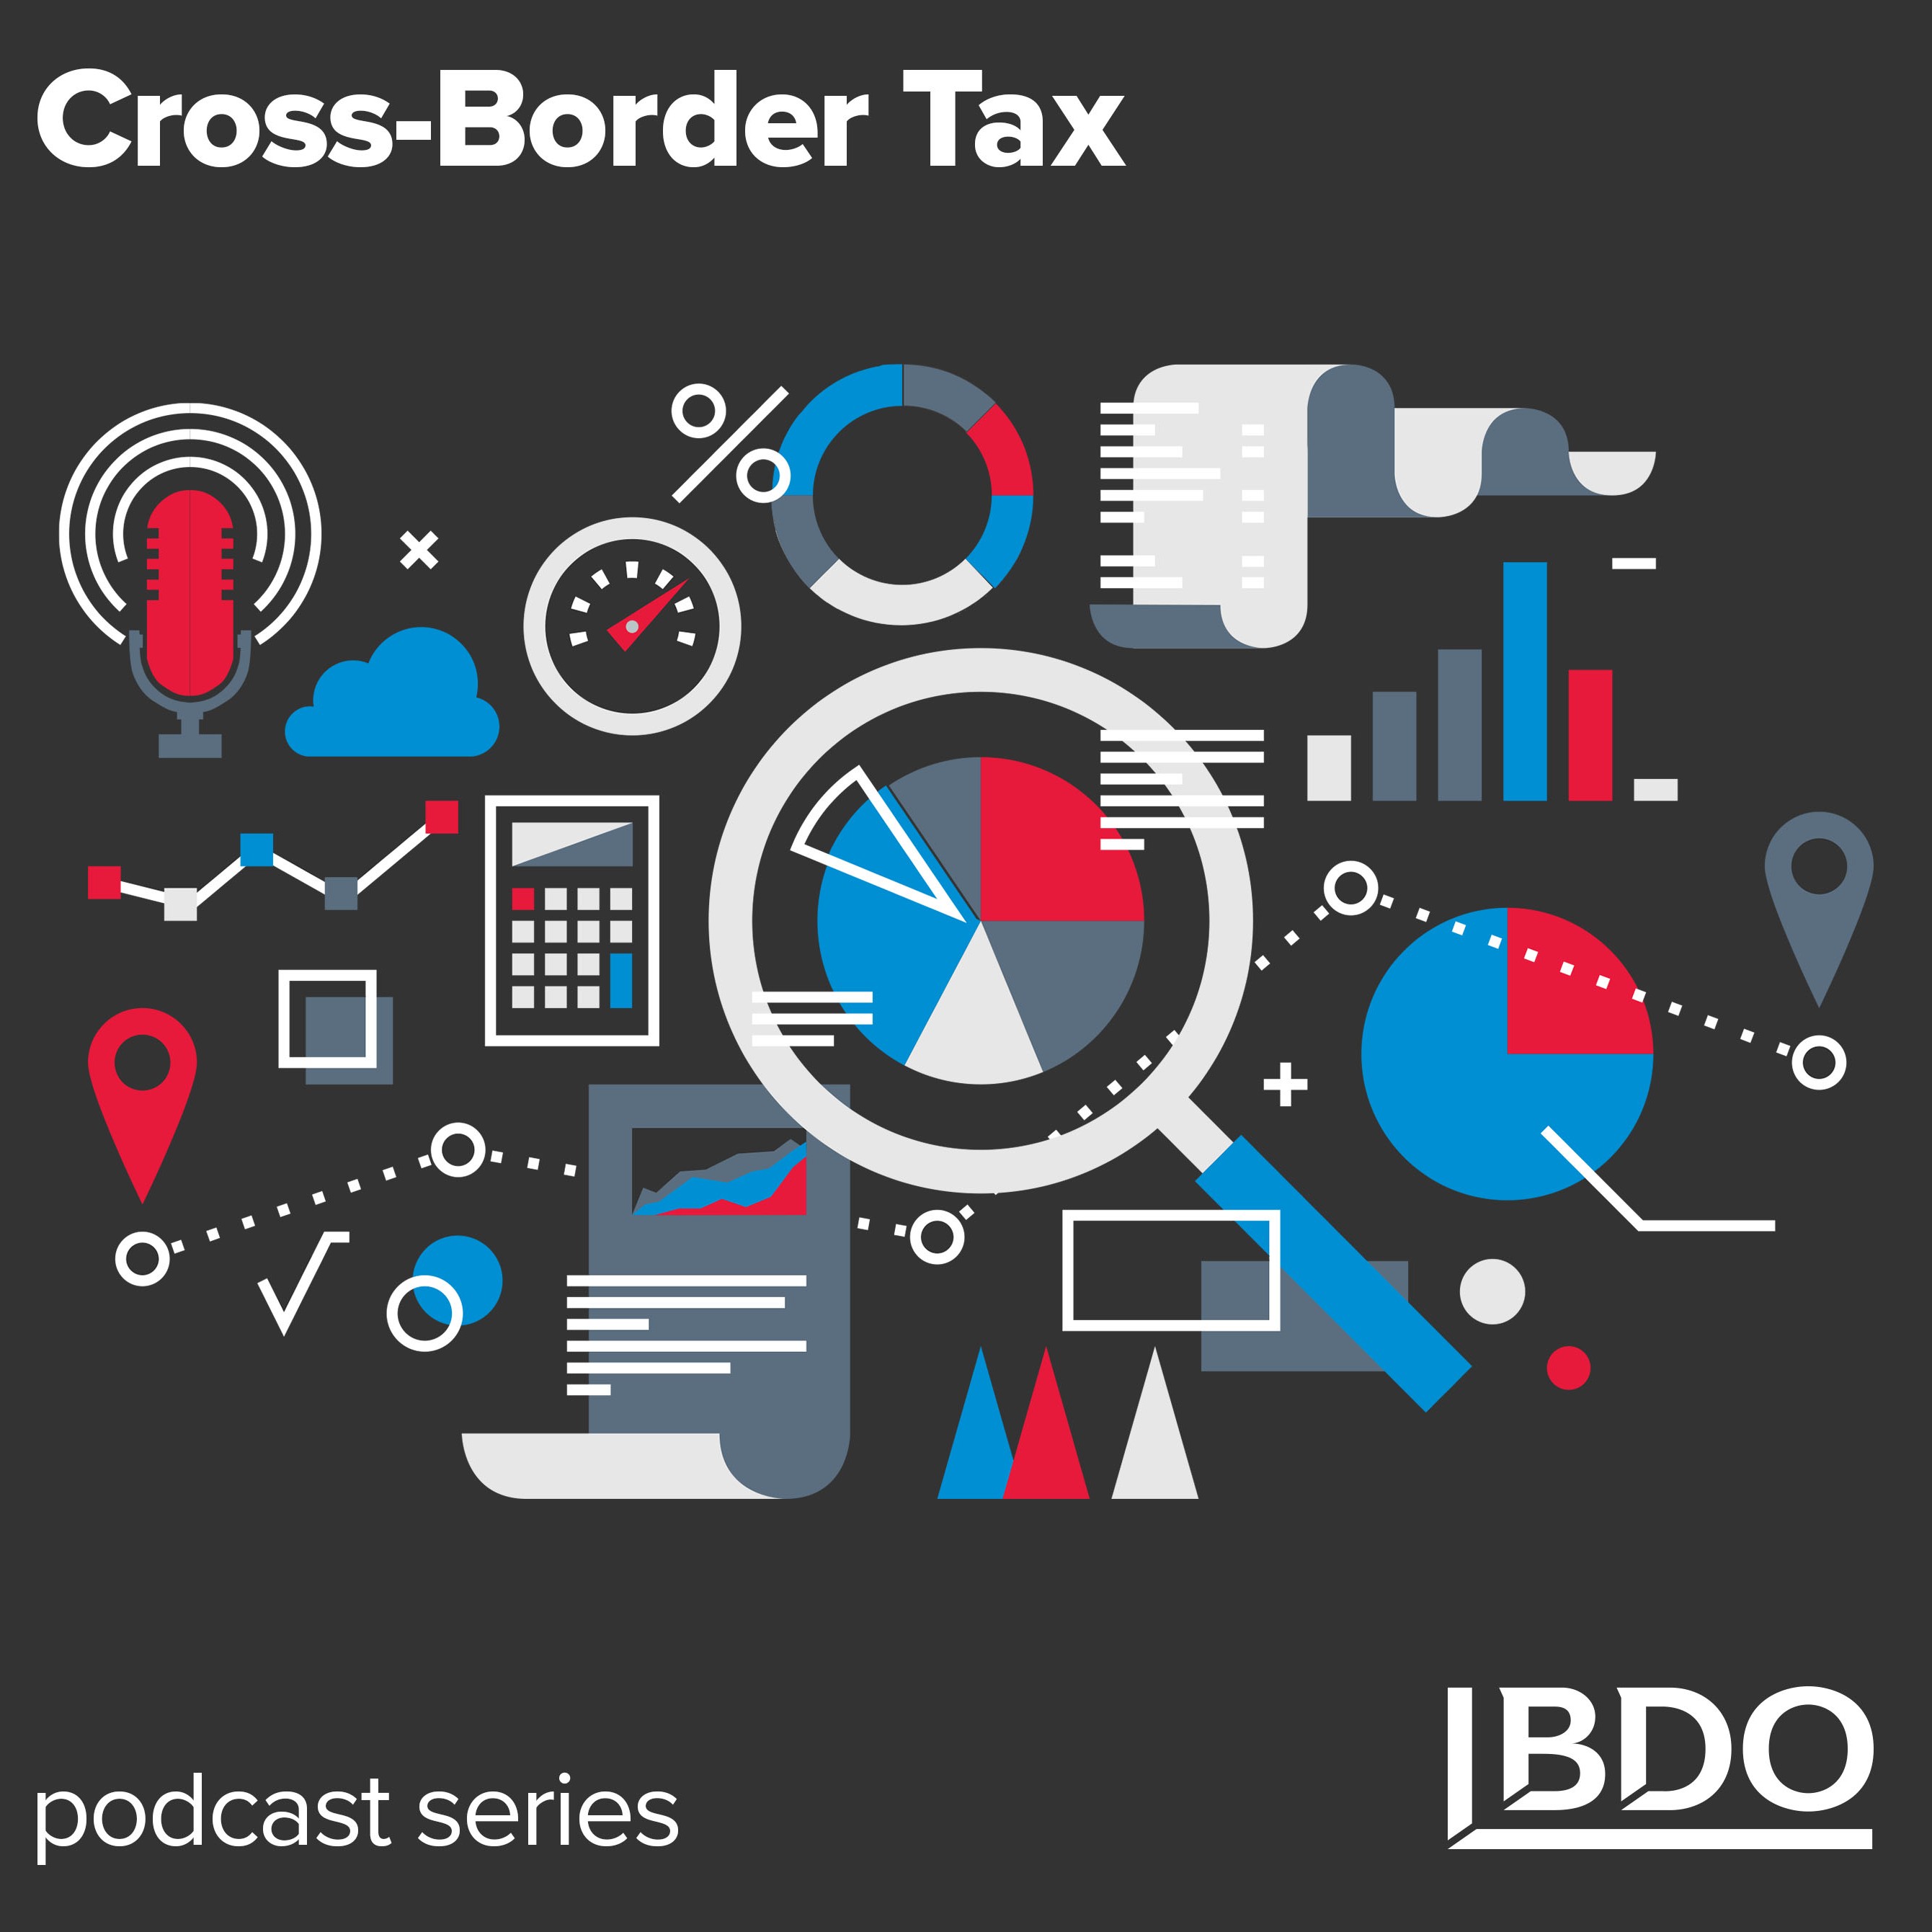 The Cross-Border Tax Podcast Series by BDO Canada